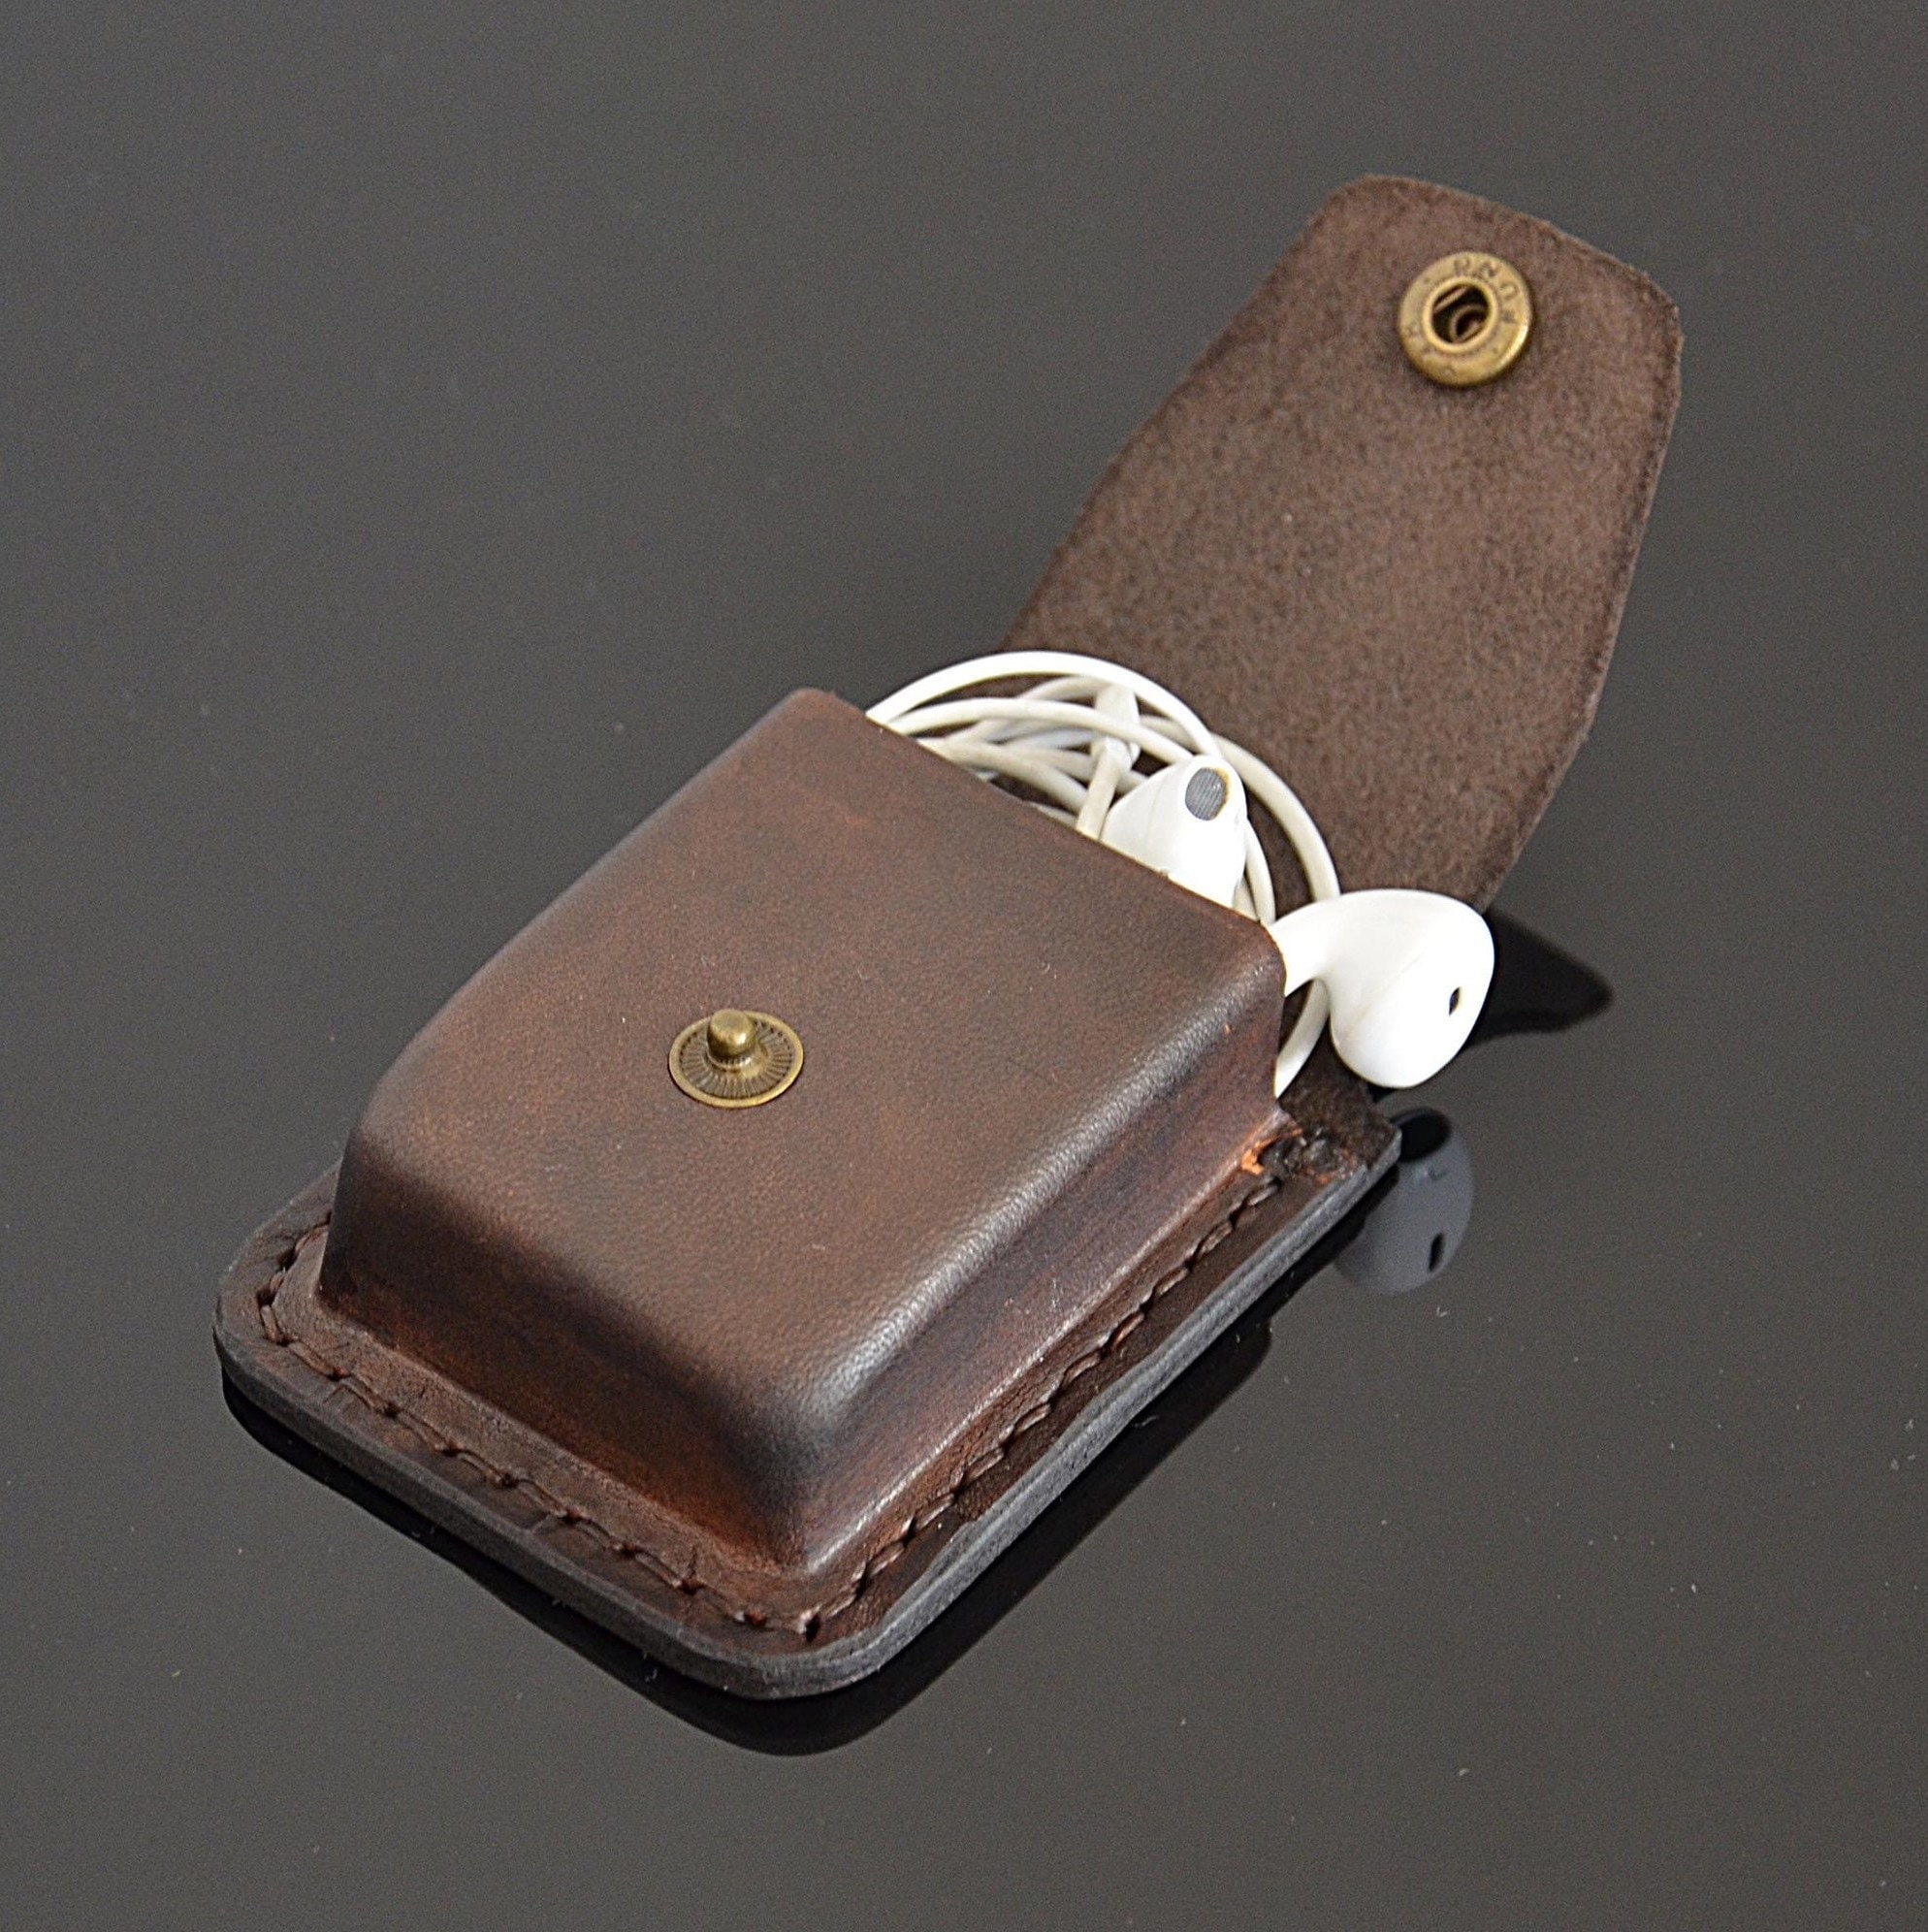 Real Leather Earphone Holder Belt Pouch Personalized Earbud Case